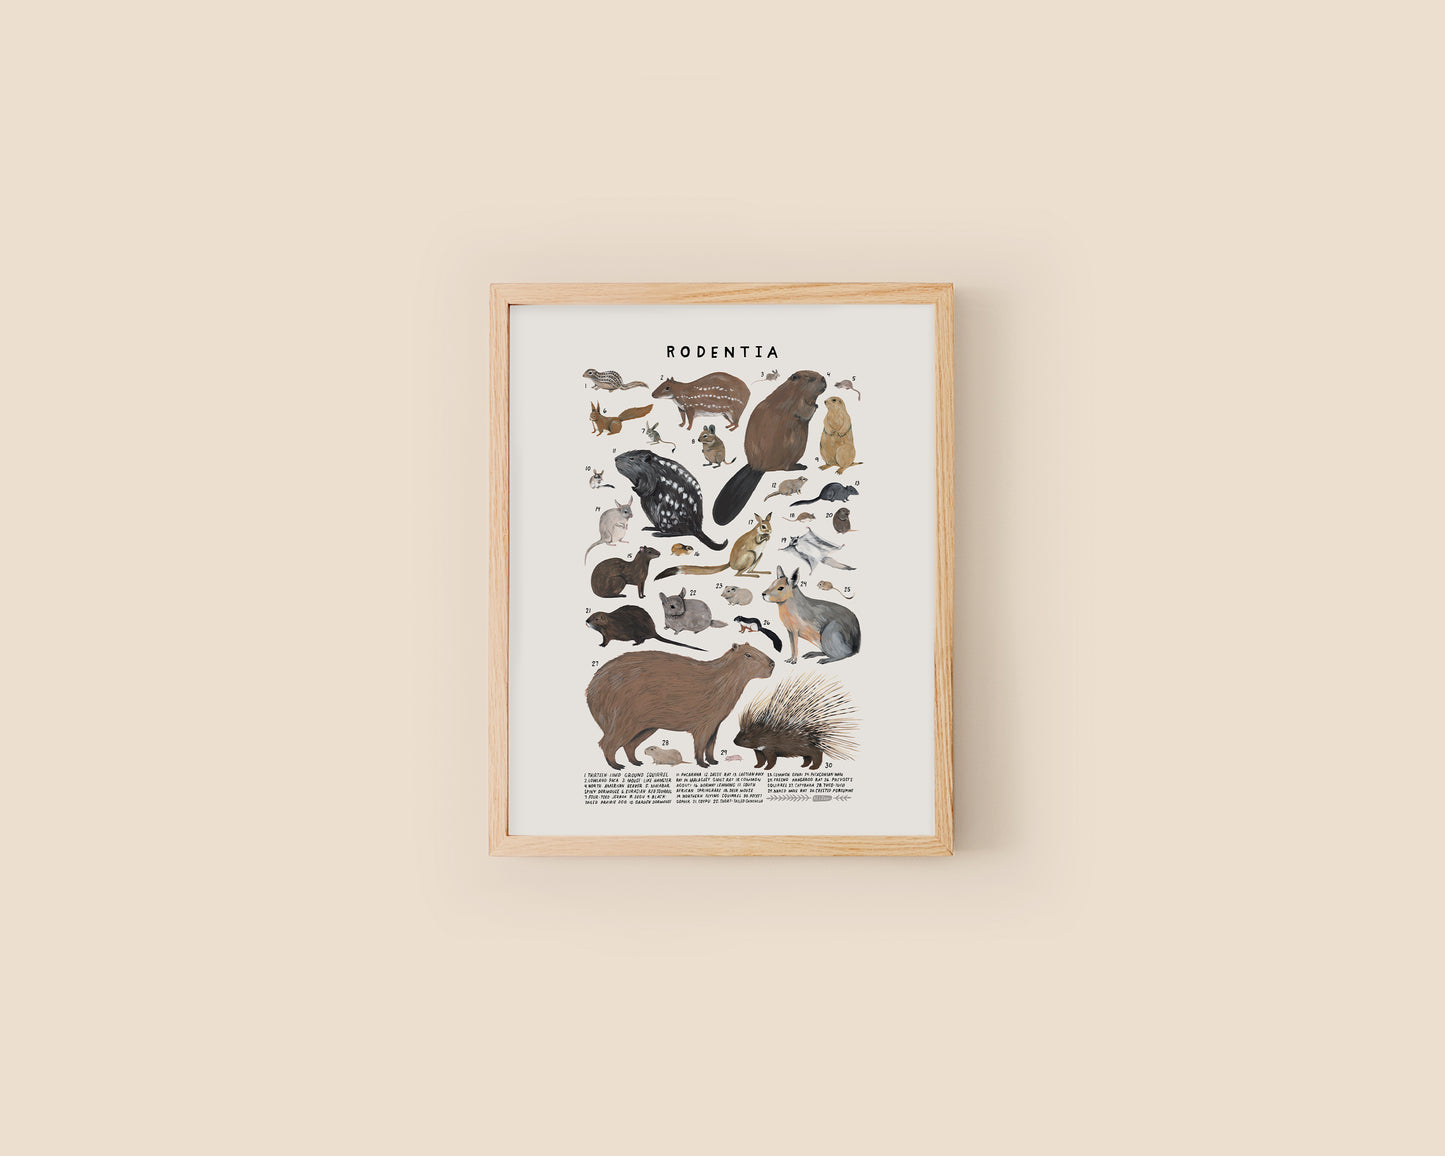 Squirrels, porcupines, and other rodents art print- Creatures of the Order Rodentia